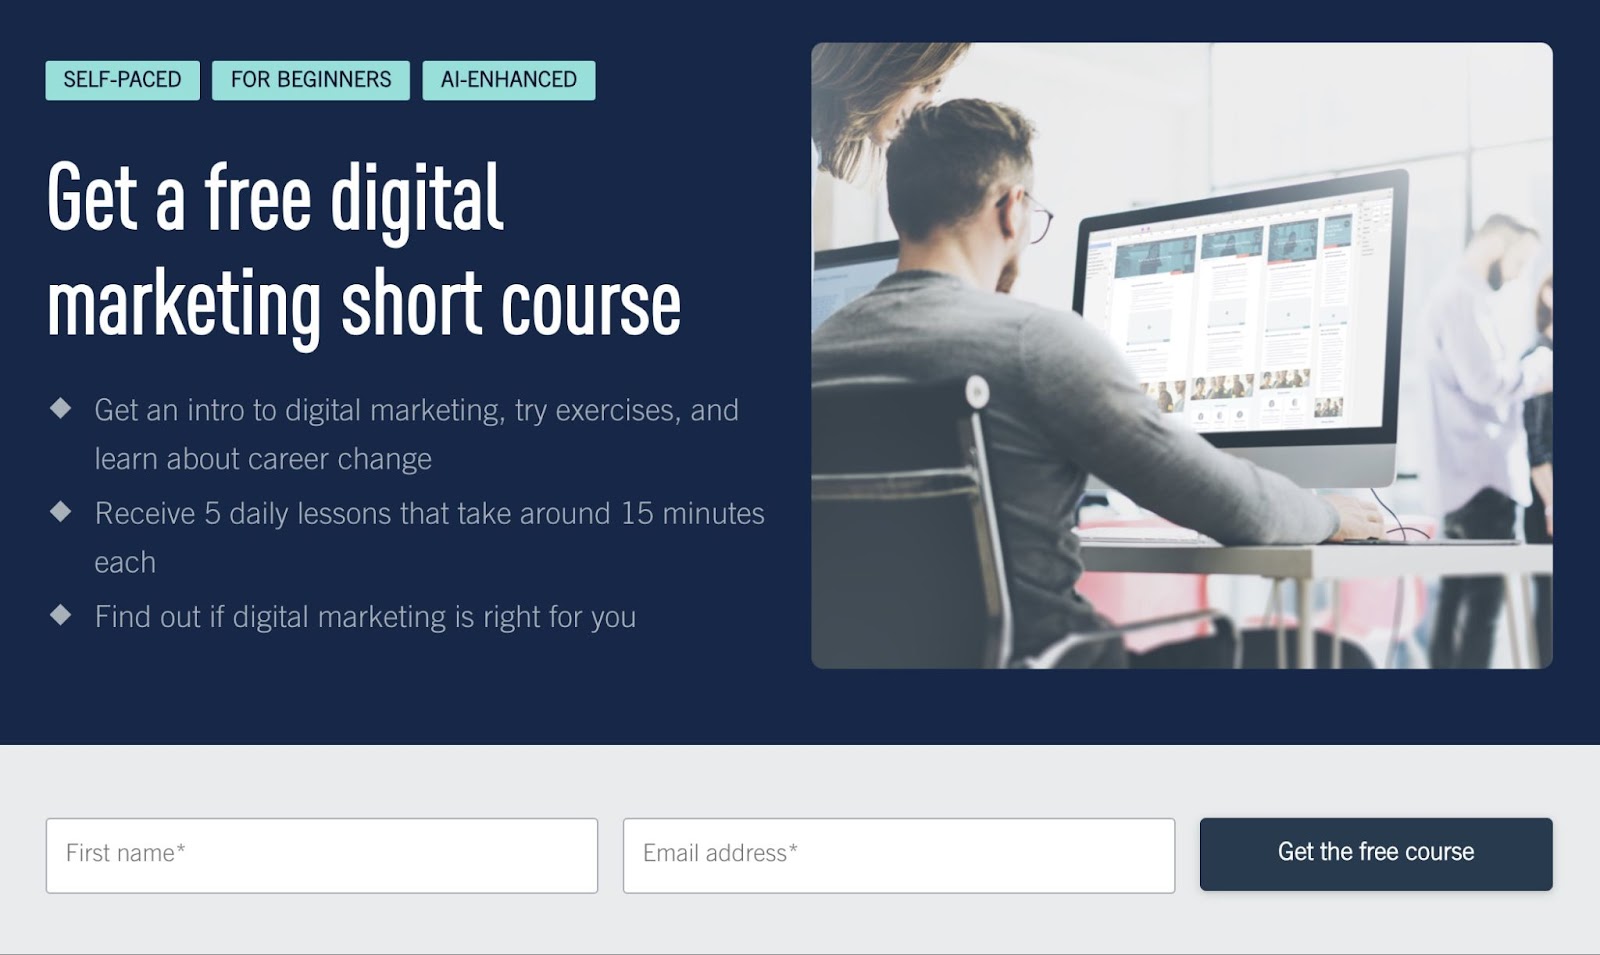 CareerFoundry's free digital marketing course form